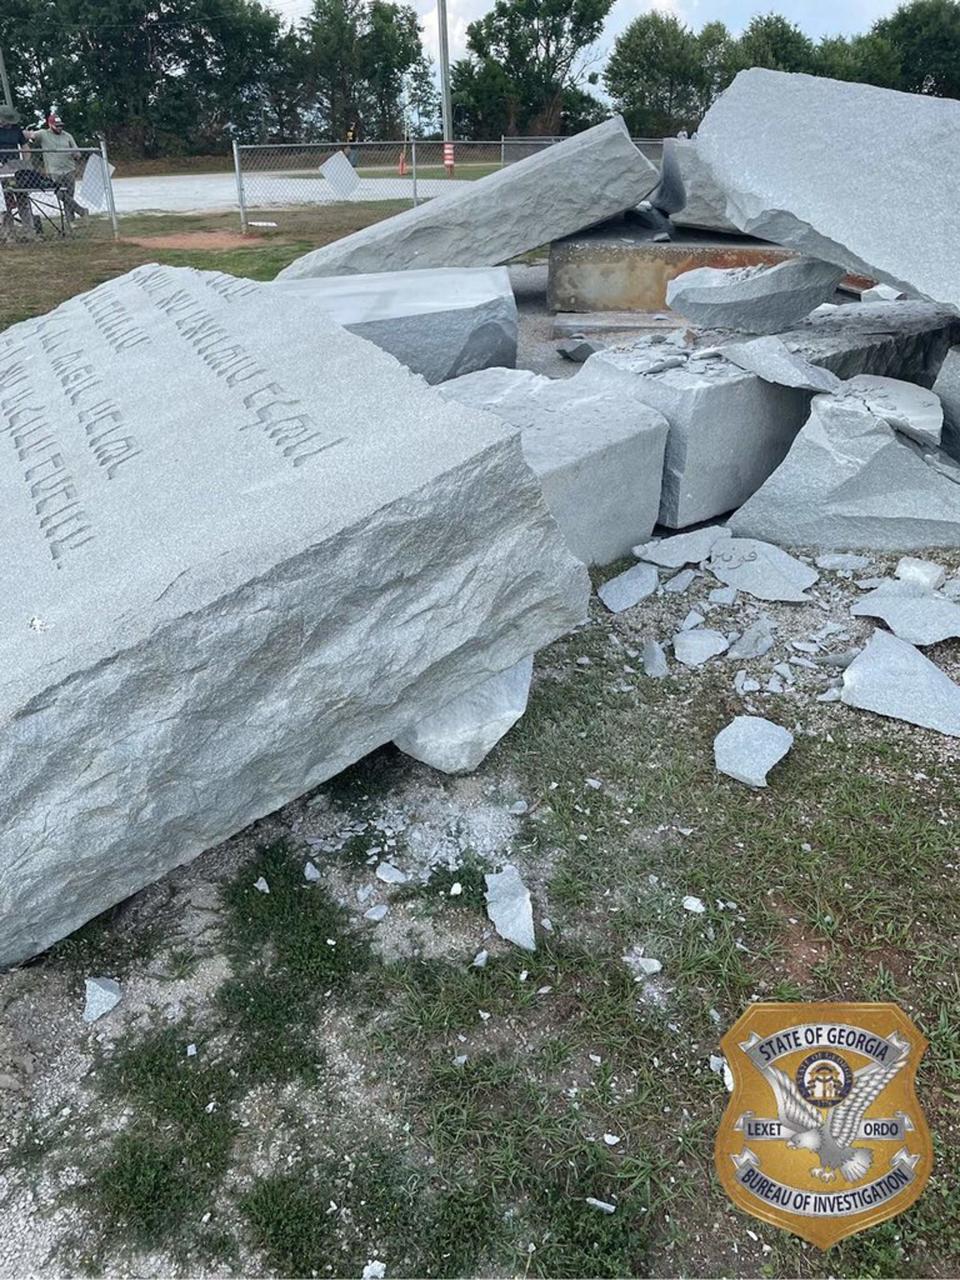 Close up of the remains of the Guidestones after the attack and demolition released by the Georgia Bureau of Investigation (Georgia Bureau of Investigation/)